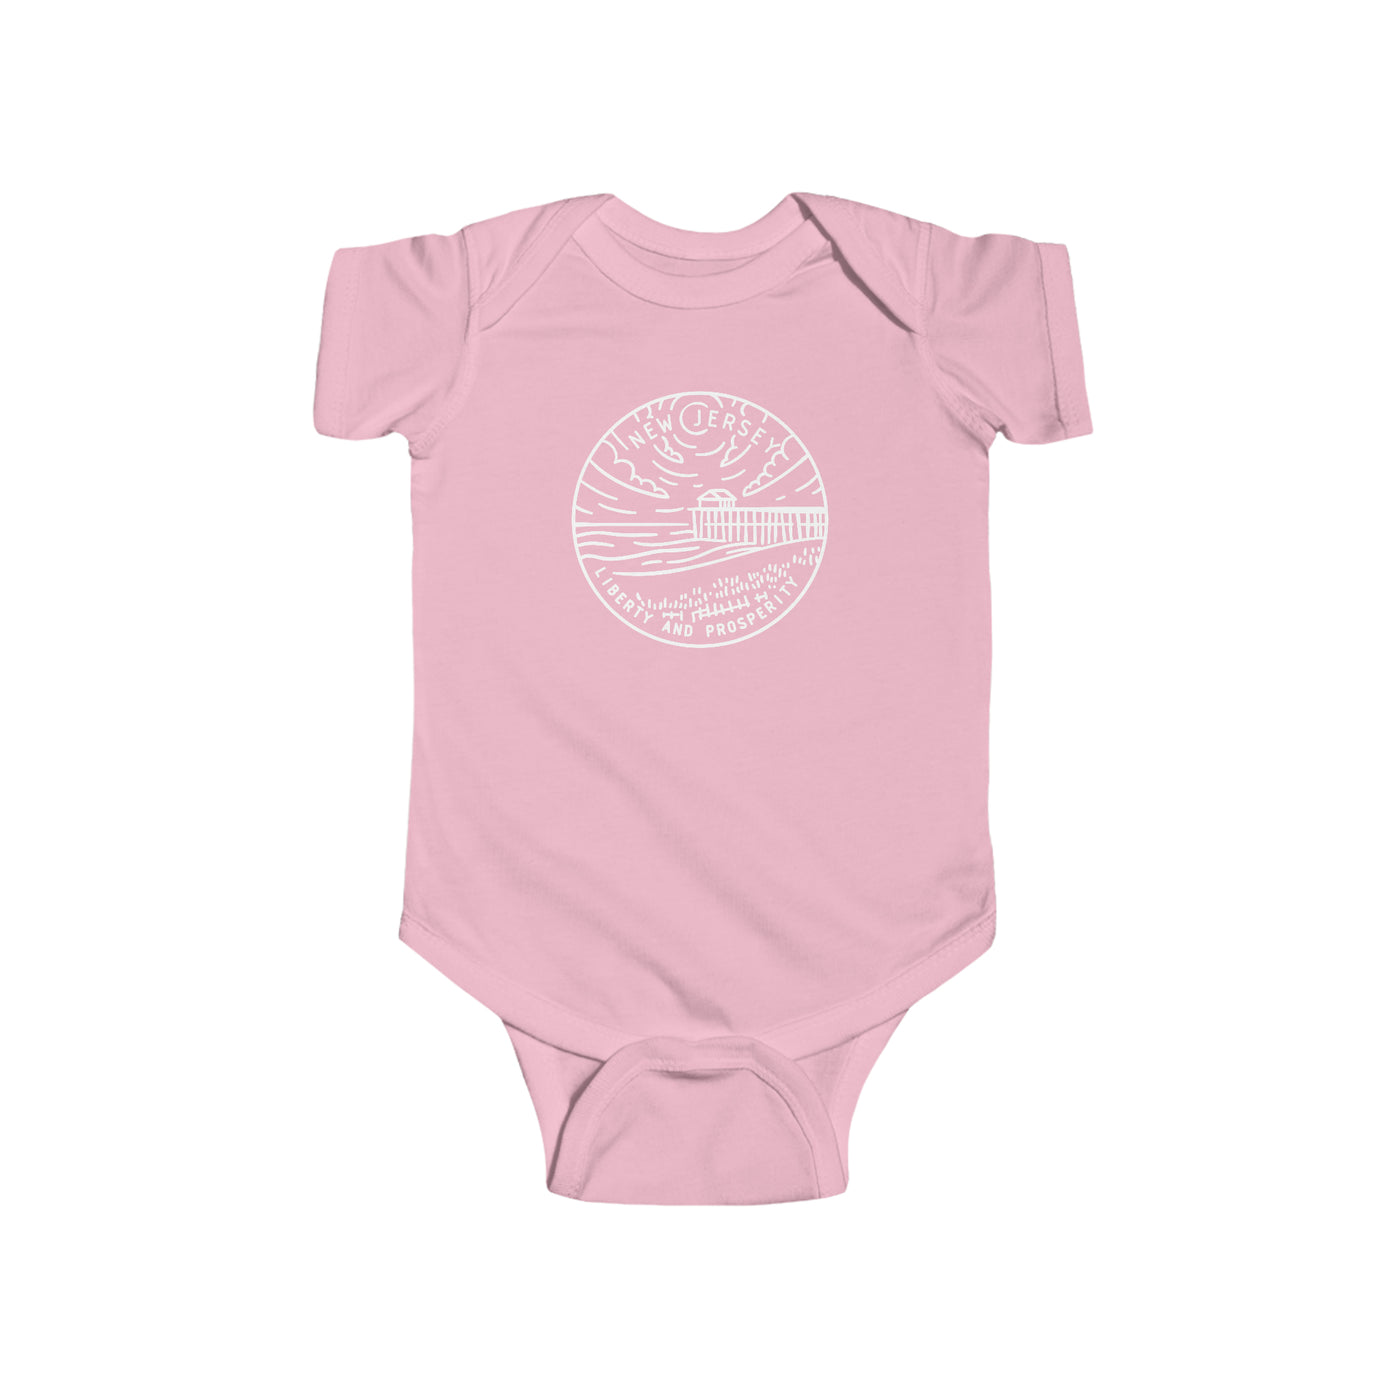 New Jersey State Motto Baby Bodysuit